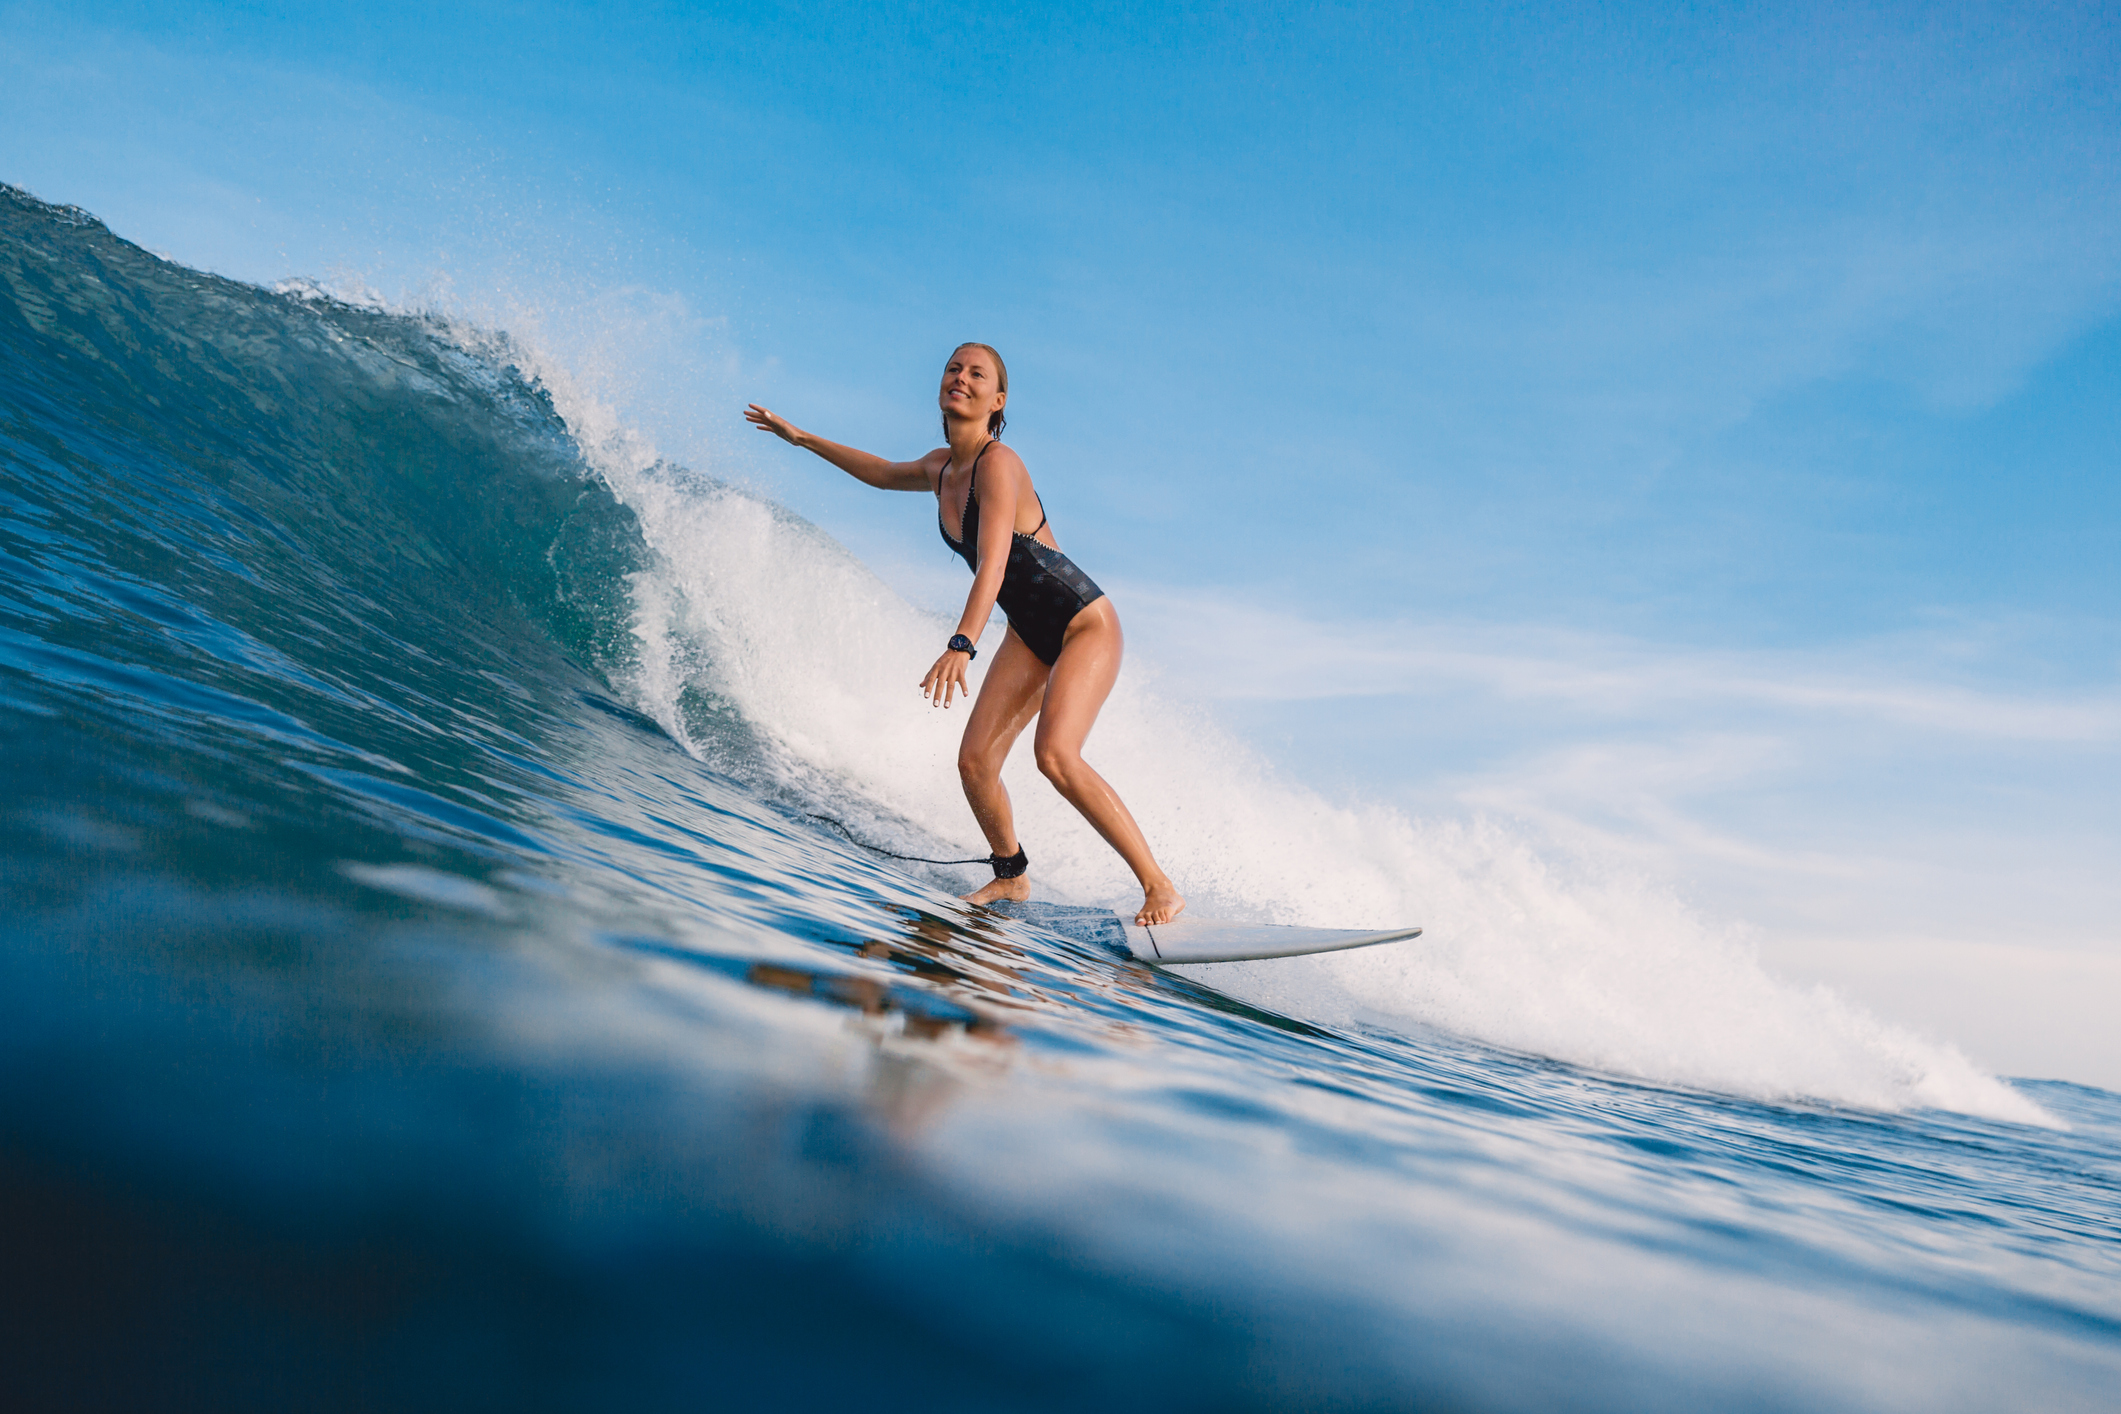 Surfer woman at surfboard ride on wave. Woman in ocean during surfing.